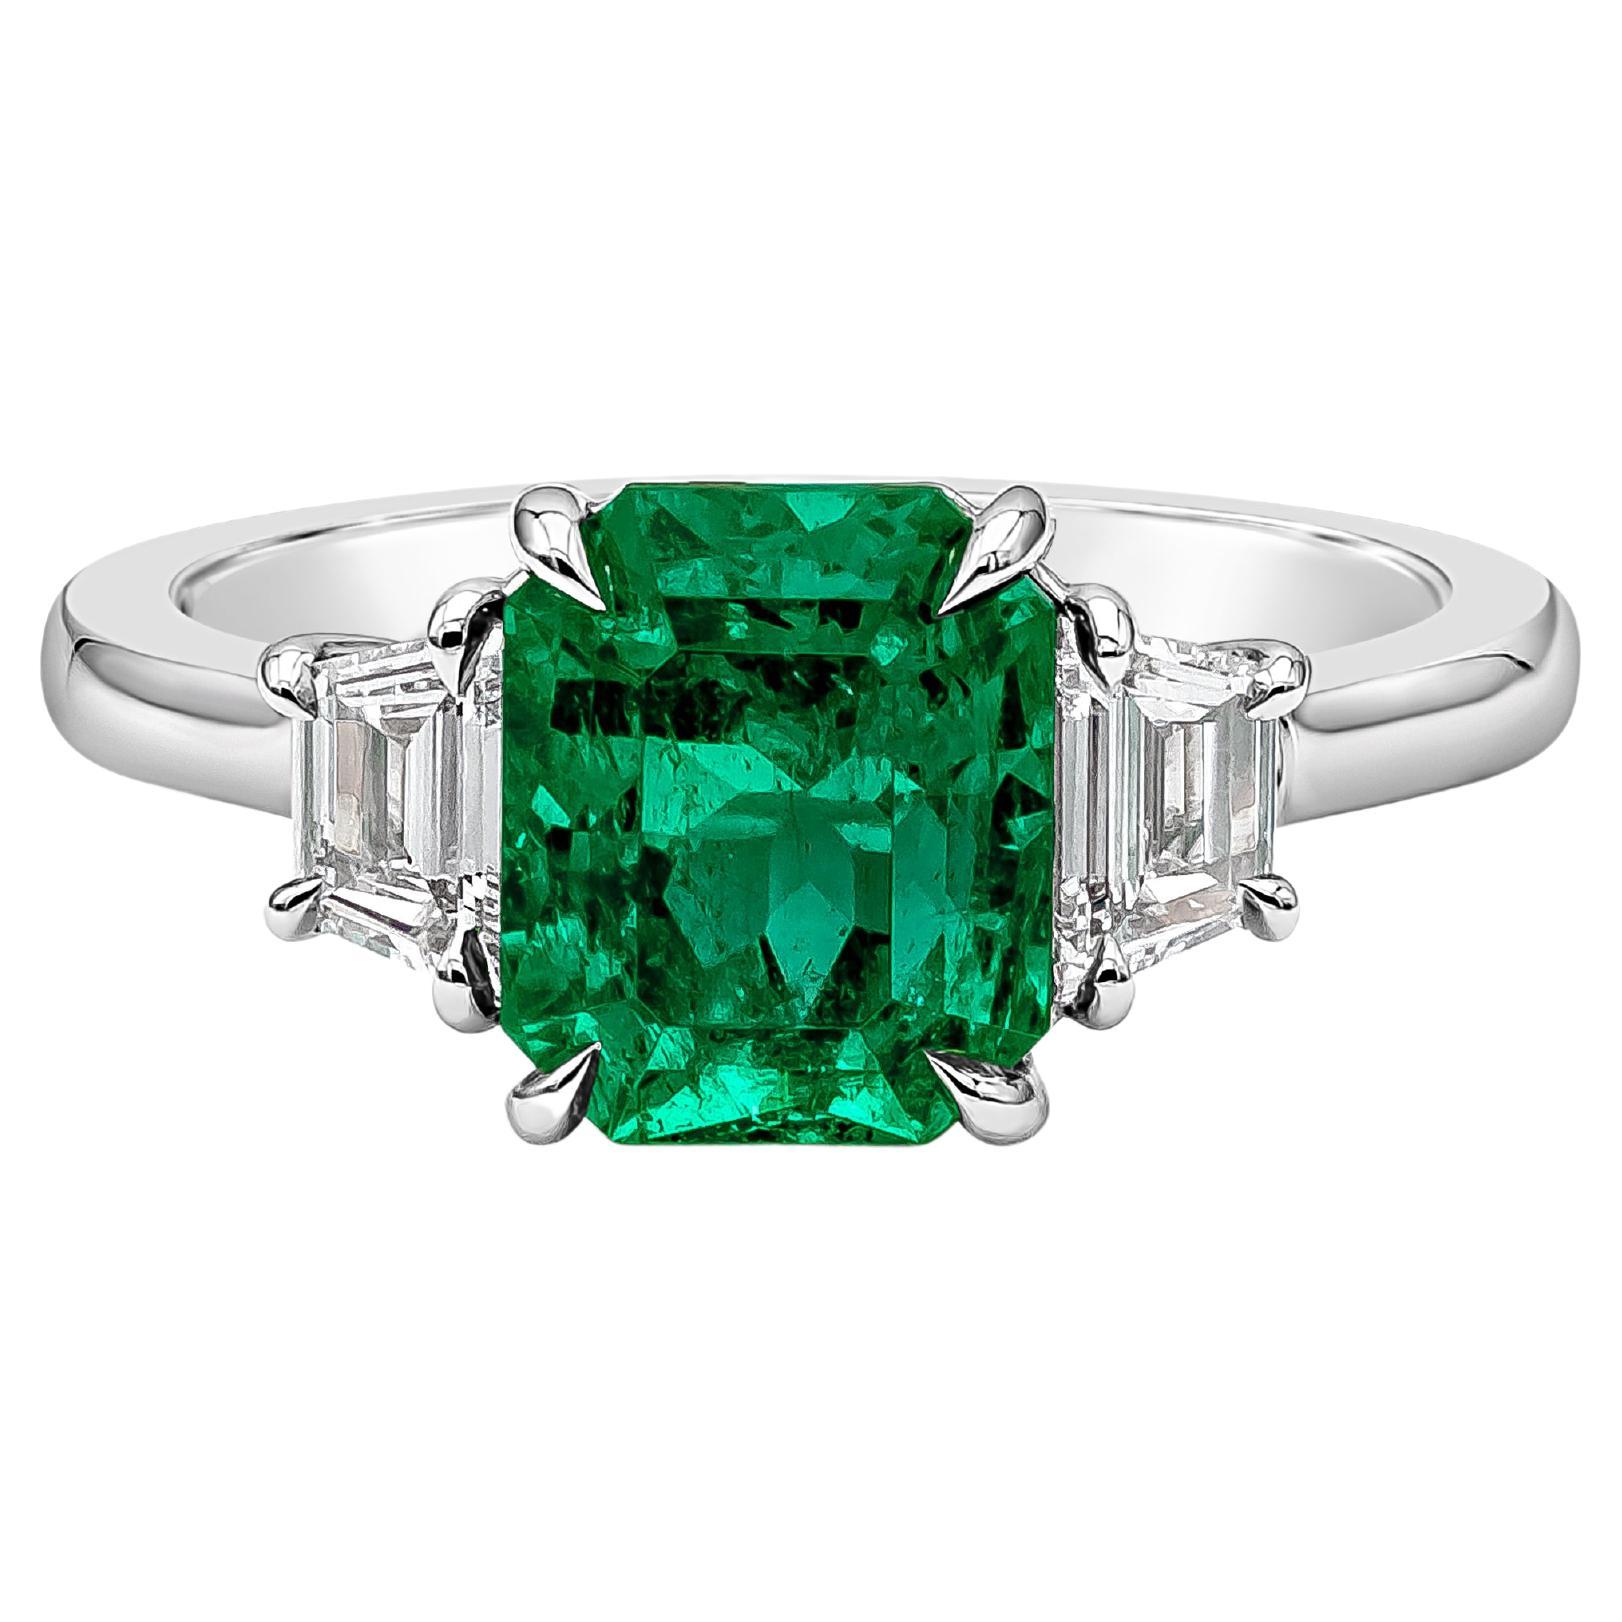 Roman Malakov, Radiant Cut Colombian Emerald With Side Stones Engagement Ring